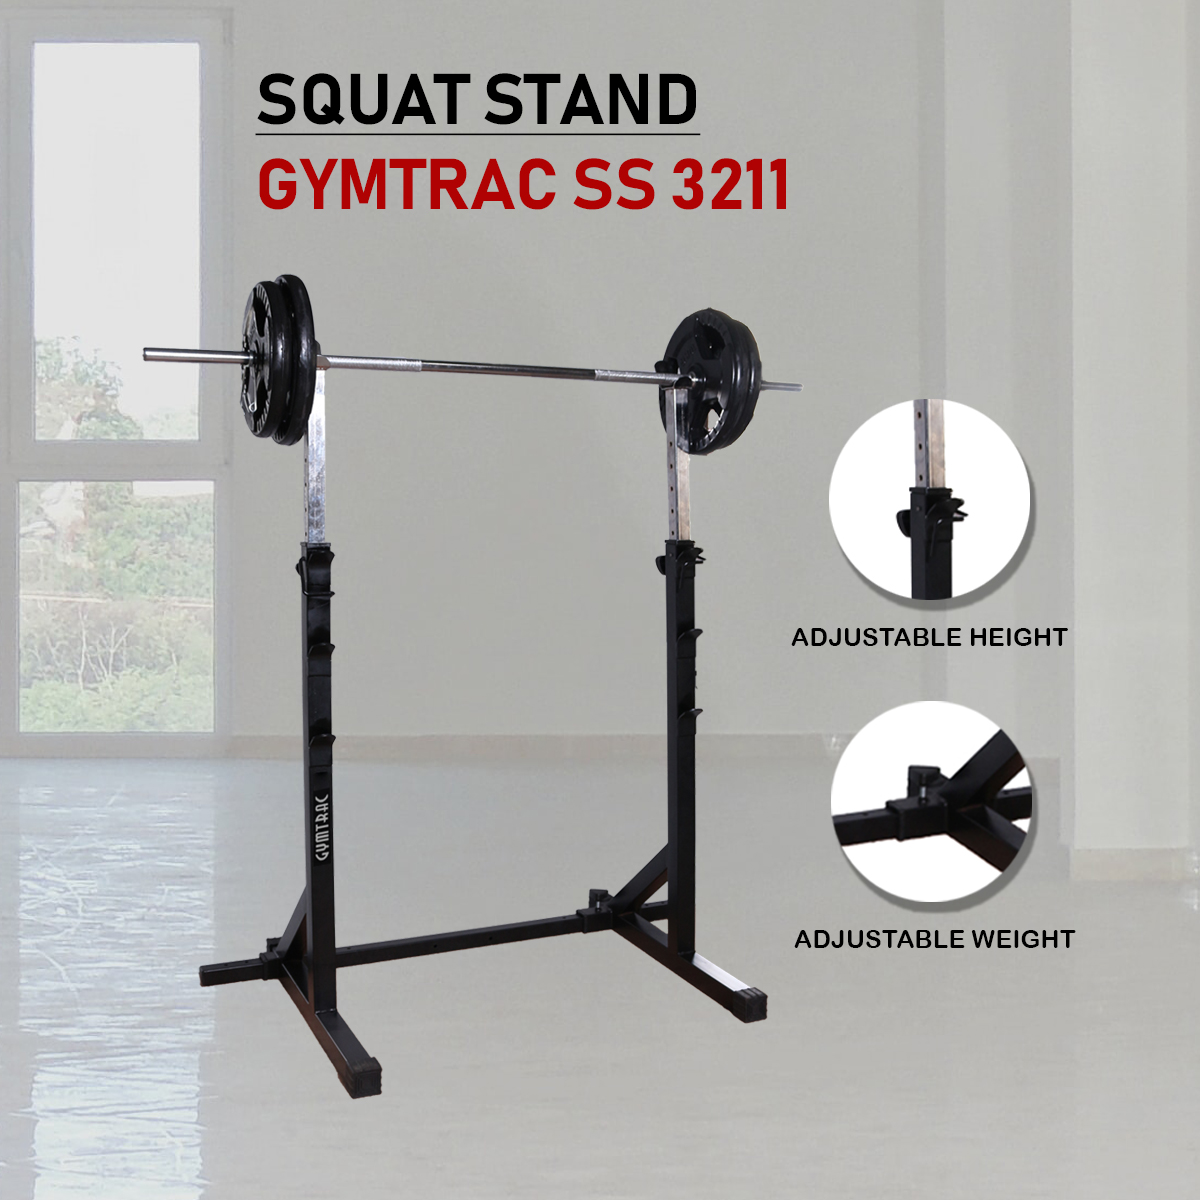 GYMTRAC SS 3211 SQUAT STAND